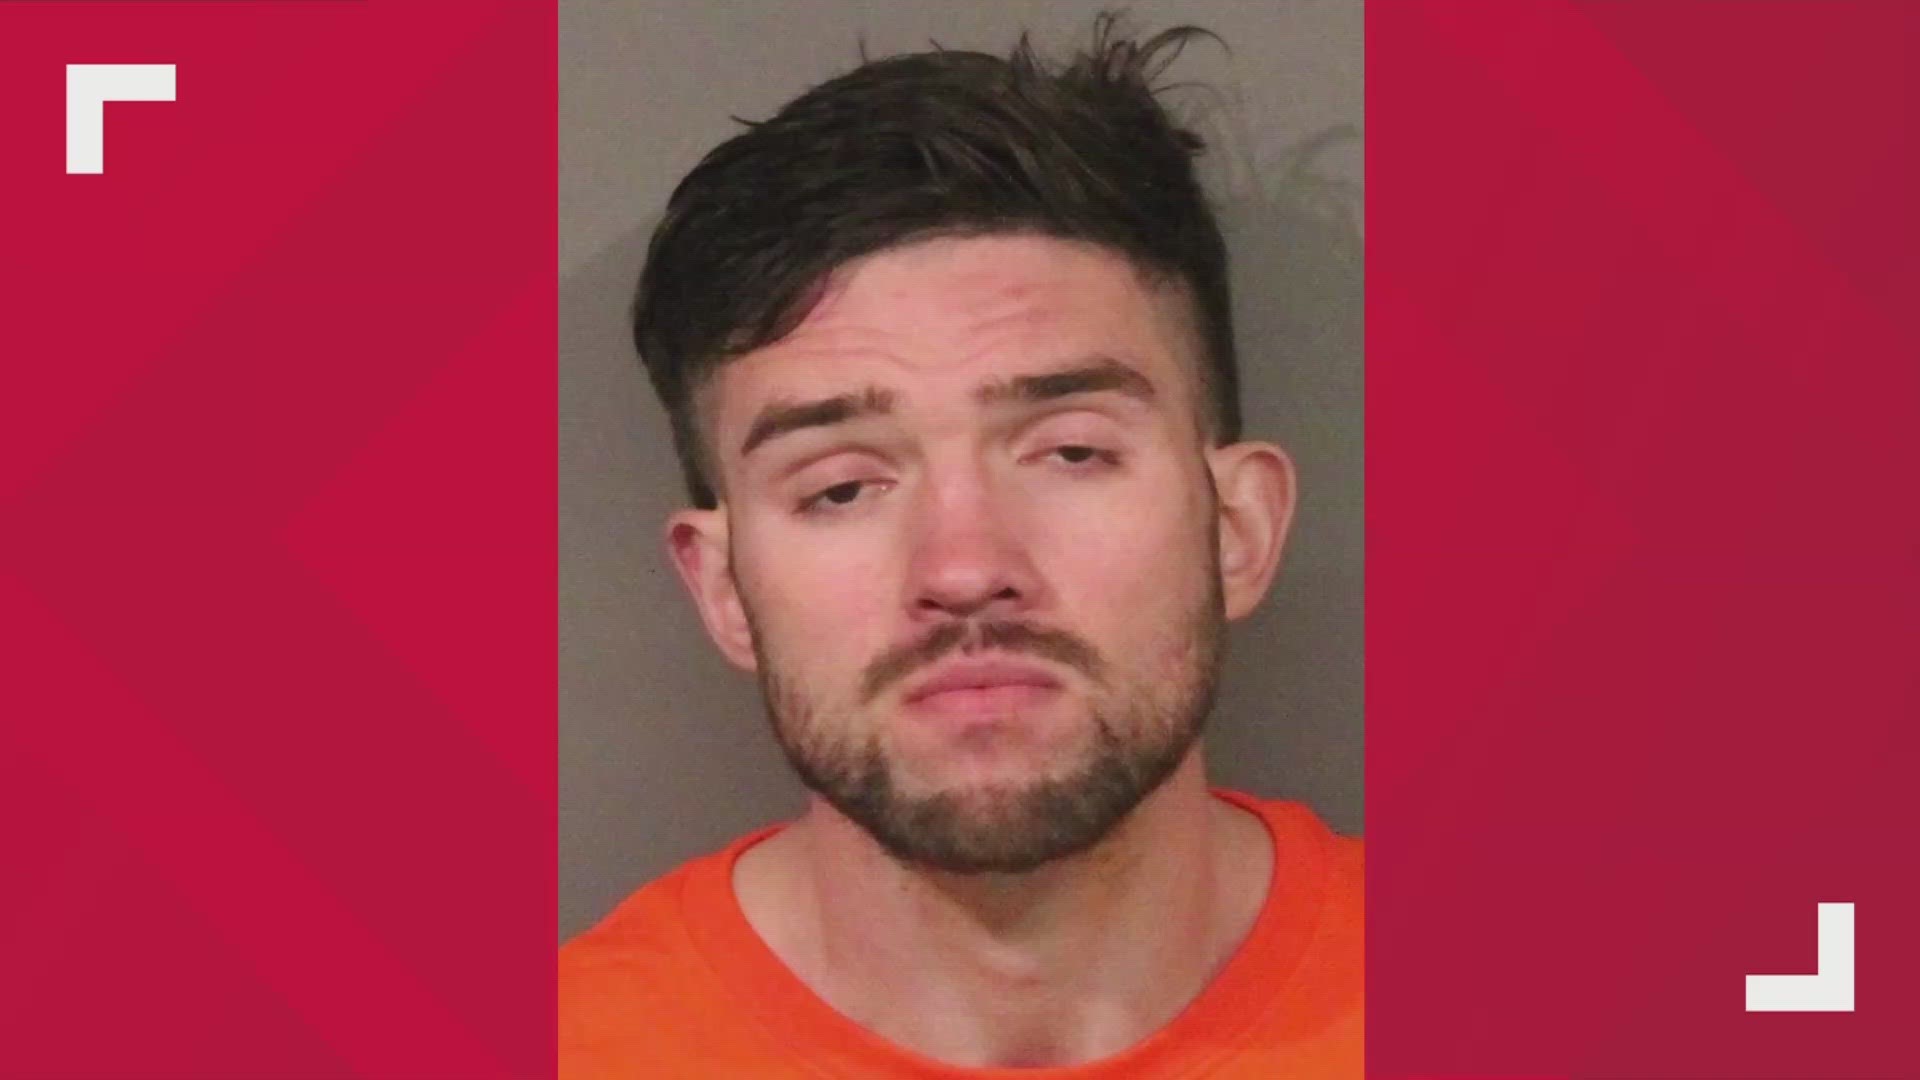 Law enforcement arrested the man believed to be connected with shootings in Roseville and Citrus Heights, as well as threats at the California State Capitol.